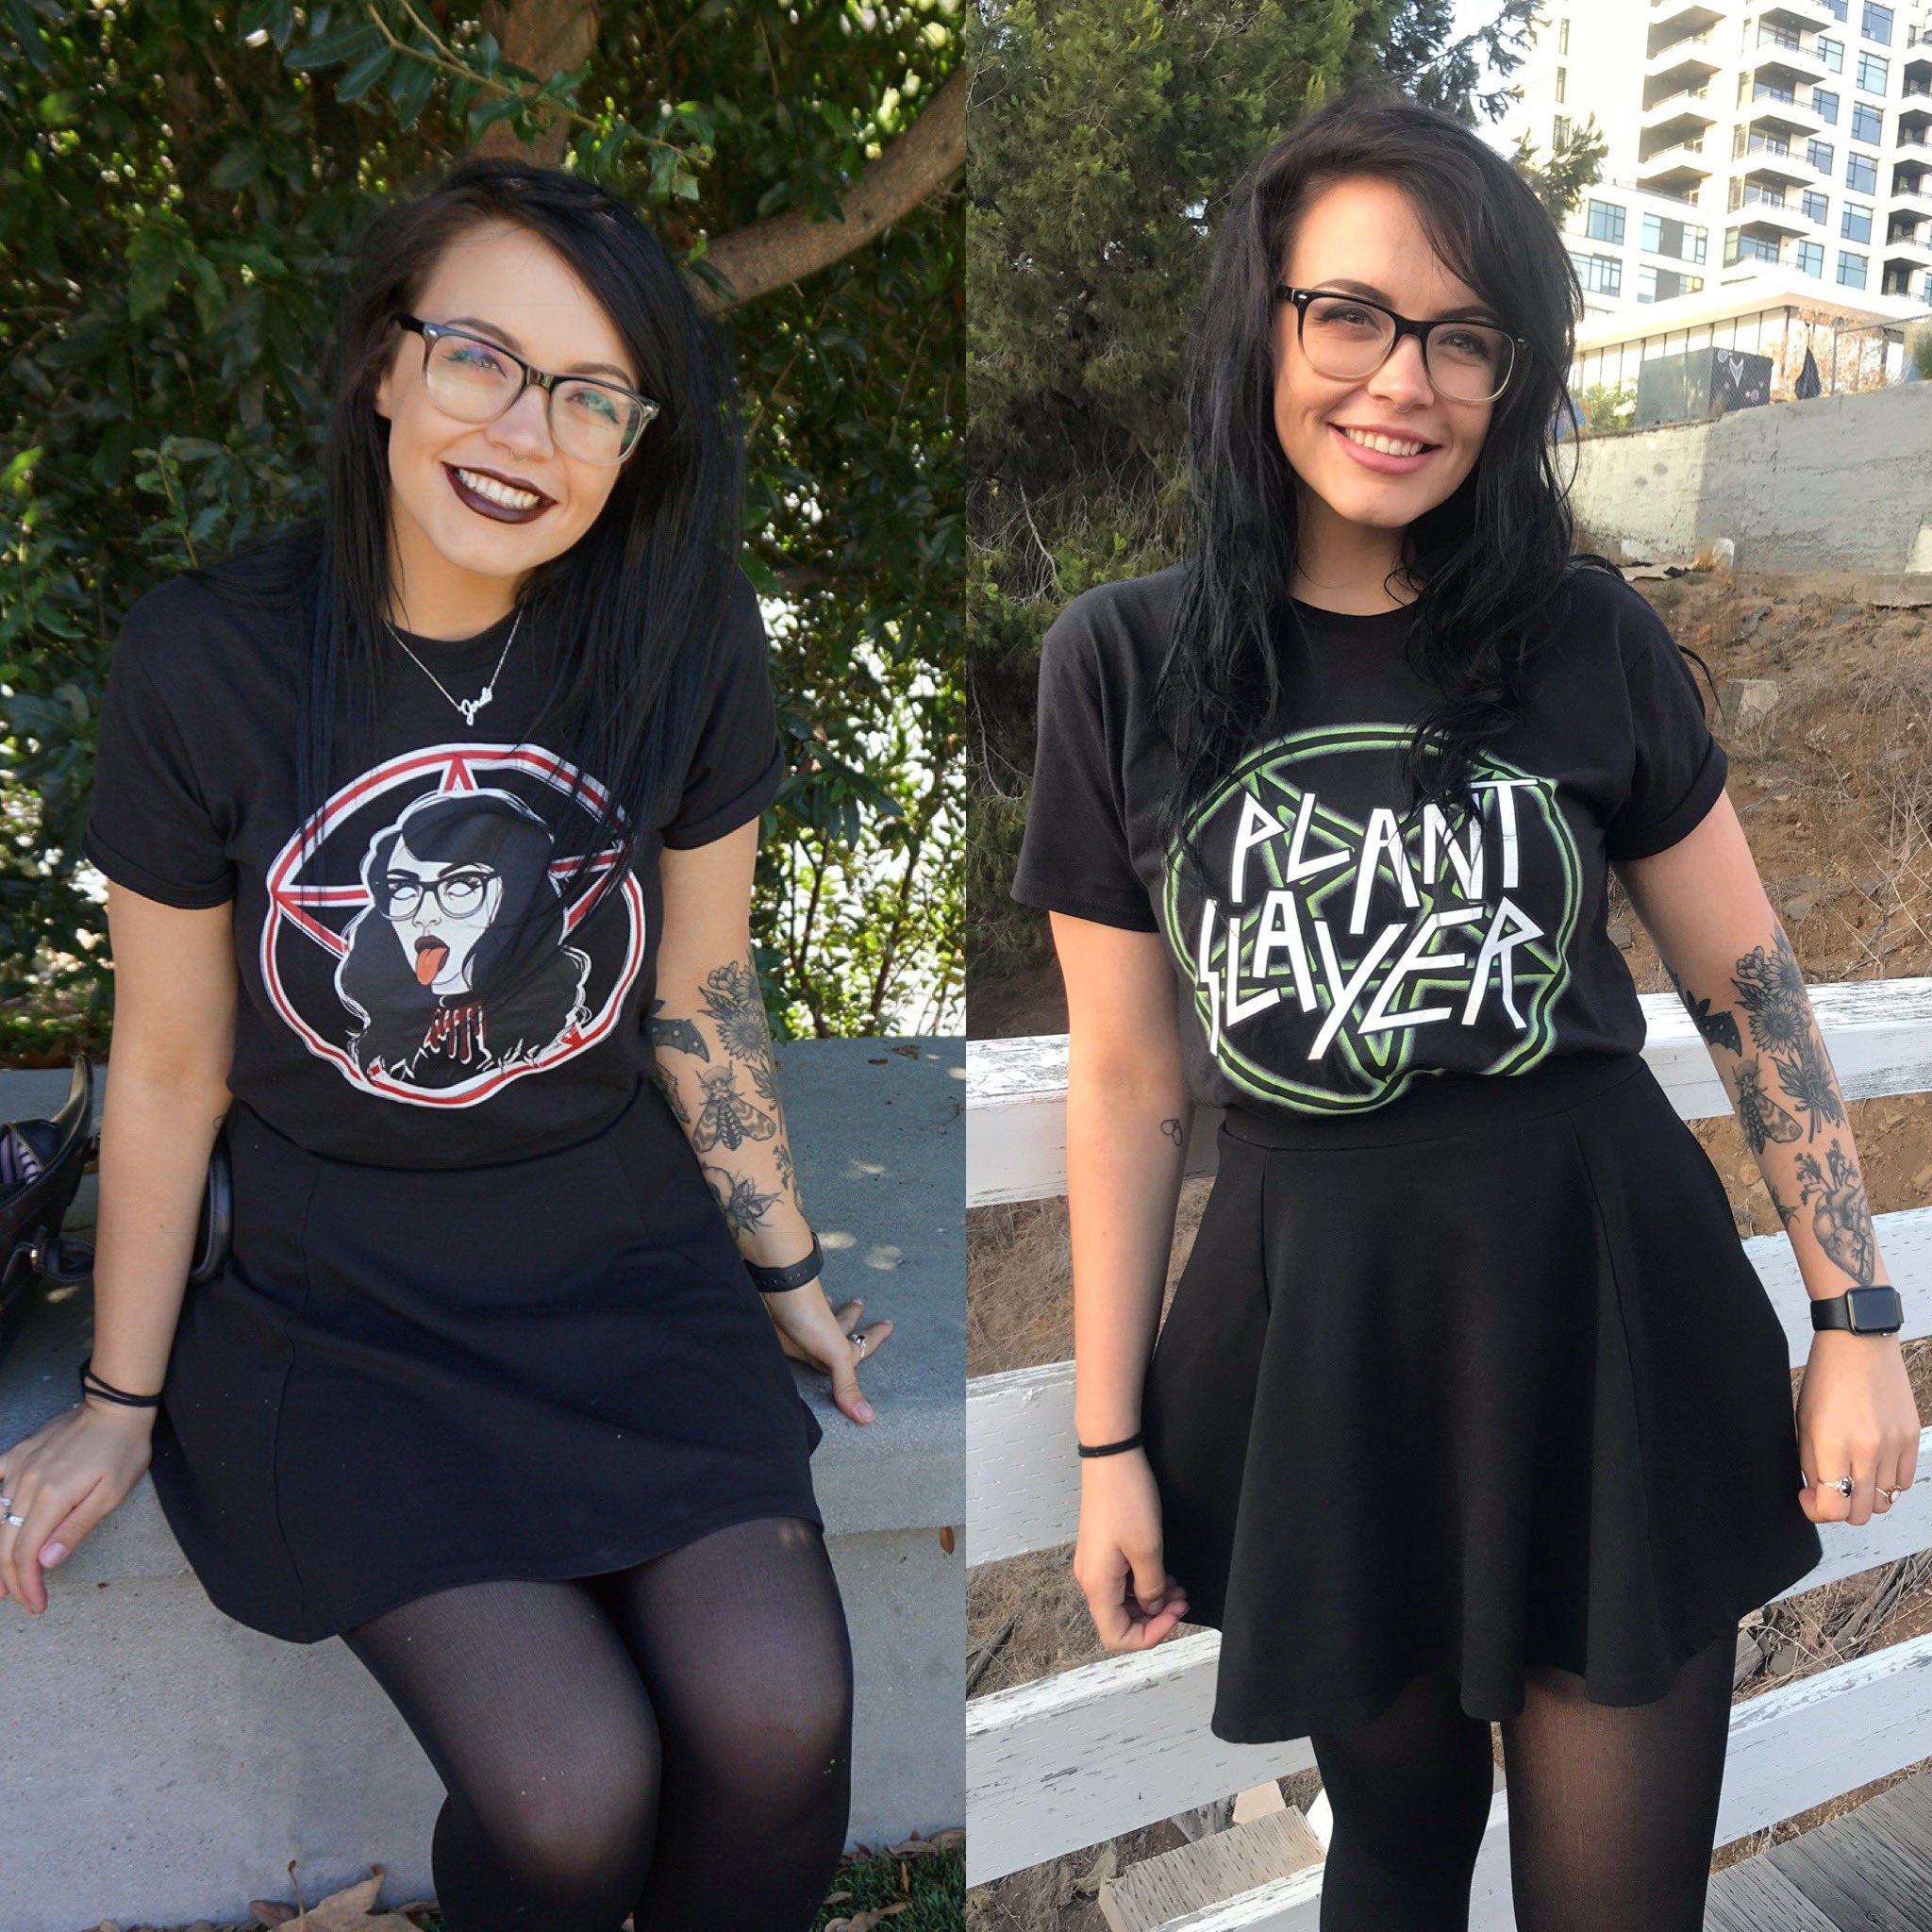 Let Manøvre travl Jordo 🎃 on Twitter: "Thought I'd try something new. 🥰 Doing a merch  giveaway here. 🥳✨ Just retweet this tweet to enter. 🖤 I'll pick the  winner on Sunday. Winner gets to